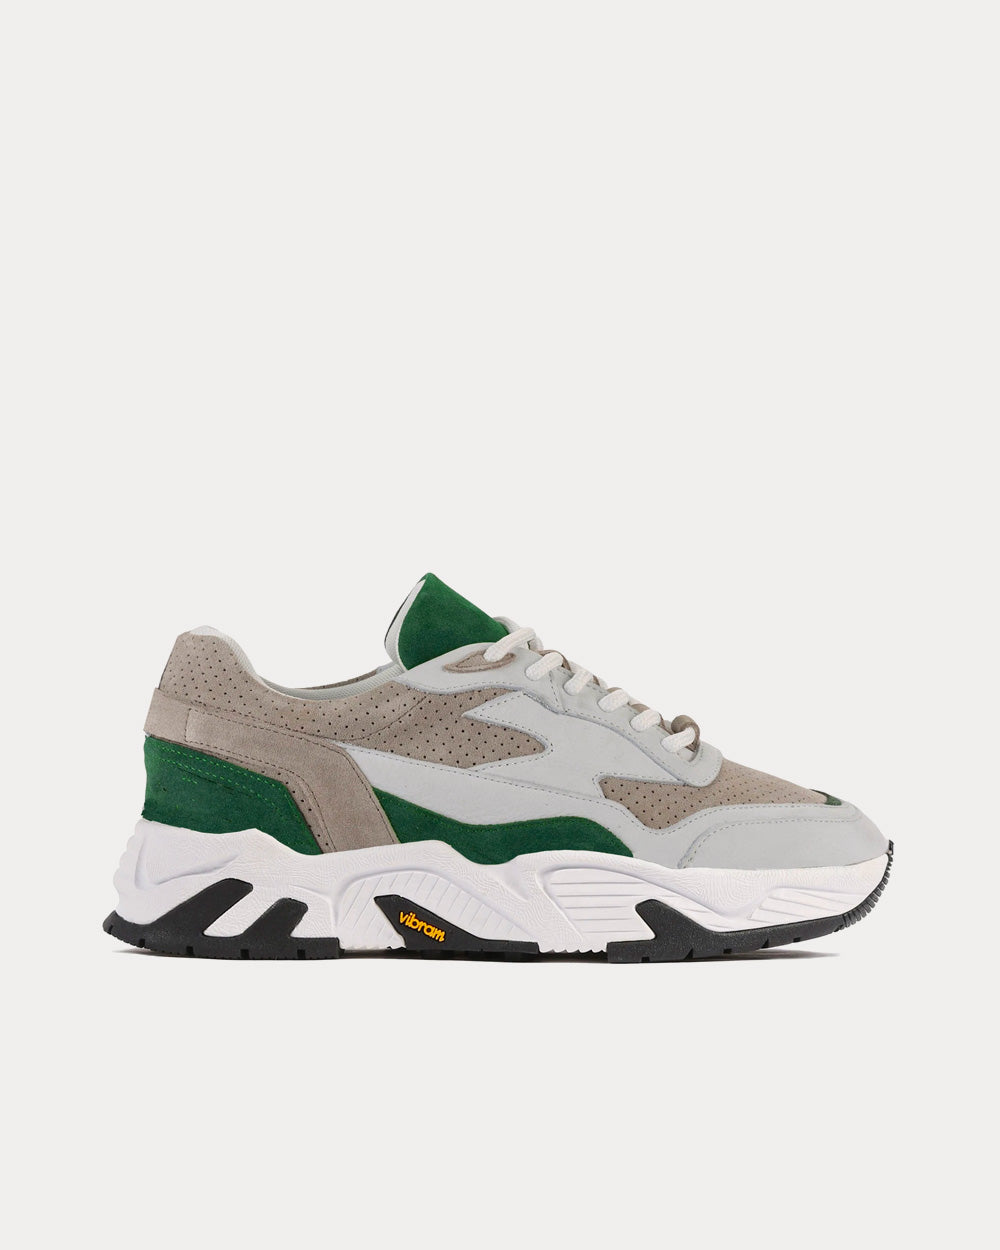 Soho Grit - The Hollen White Stone Green Low Top Sneakers